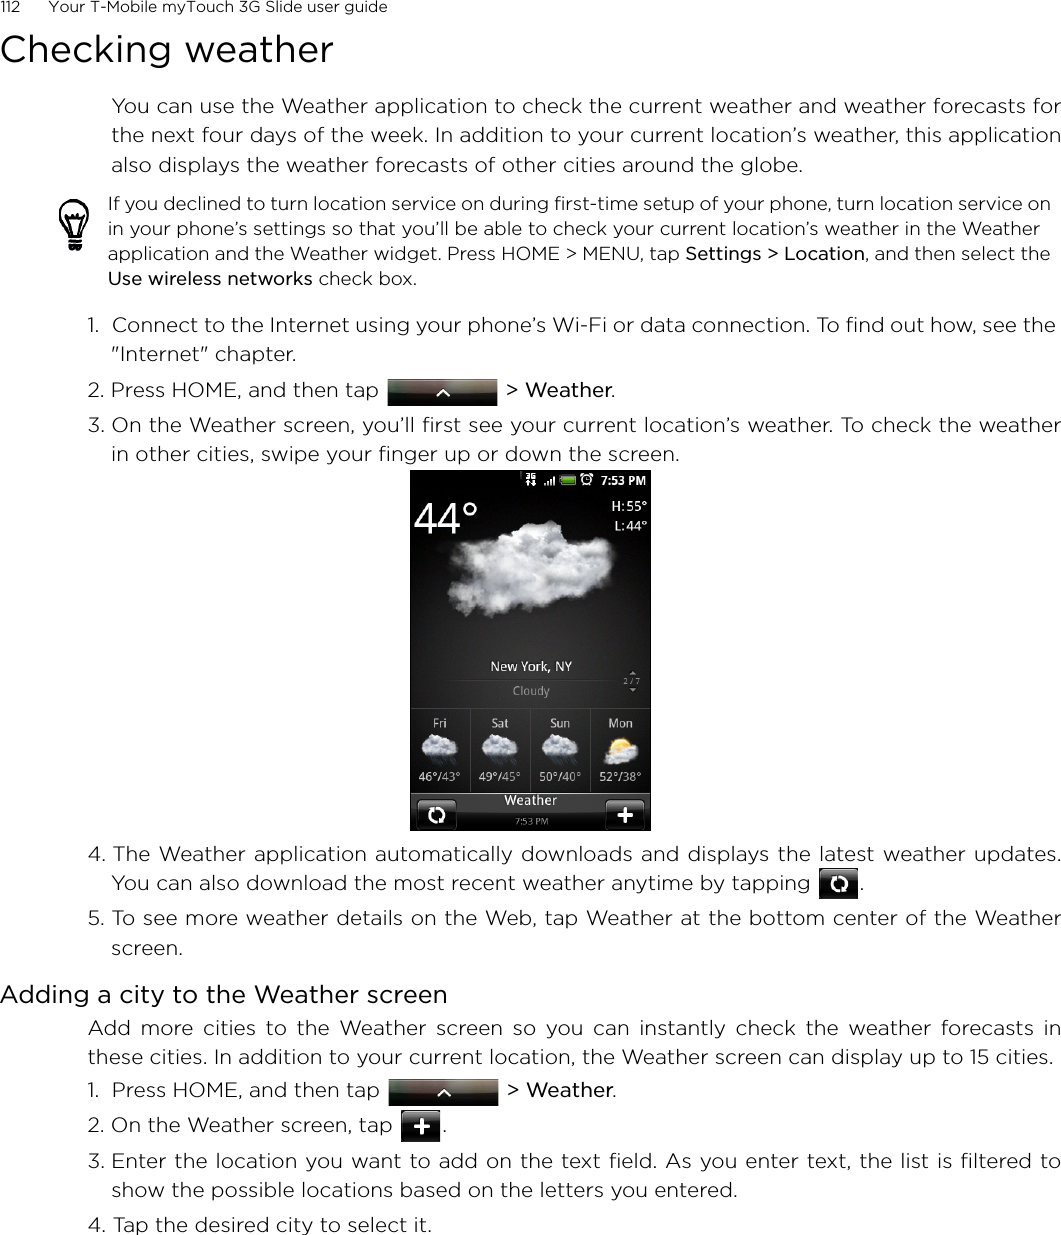 112      Your T-Mobile myTouch 3G Slide user guide Checking weatherYou can use the Weather application to check the current weather and weather forecasts forthe next four days of the week. In addition to your current location’s weather, this applicationalso displays the weather forecasts of other cities around the globe.1.  Connect to the Internet using your phone’s Wi-Fi or data connection. To find out how, see the &quot;Internet&quot; chapter.2. Press HOME, and then tap   &gt; Weather.3. On the Weather screen, you’ll first see your current location’s weather. To check the weatherin other cities, swipe your finger up or down the screen.4. The Weather application automatically downloads and displays the latest weather updates.You can also download the most recent weather anytime by tapping  .5. To see more weather details on the Web, tap Weather at the bottom center of the Weatherscreen.Adding a city to the Weather screenAdd more cities to the Weather screen so you can instantly check the weather forecasts inthese cities. In addition to your current location, the Weather screen can display up to 15 cities.1.  Press HOME, and then tap   &gt; Weather.2. On the Weather screen, tap  .3. Enter the location you want to add on the text field. As you enter text, the list is filtered toshow the possible locations based on the letters you entered.4. Tap the desired city to select it.If you declined to turn location service on during first-time setup of your phone, turn location service on in your phone’s settings so that you’ll be able to check your current location’s weather in the Weather application and the Weather widget. Press HOME &gt; MENU, tap Settings &gt; Location, and then select the Use wireless networks check box.